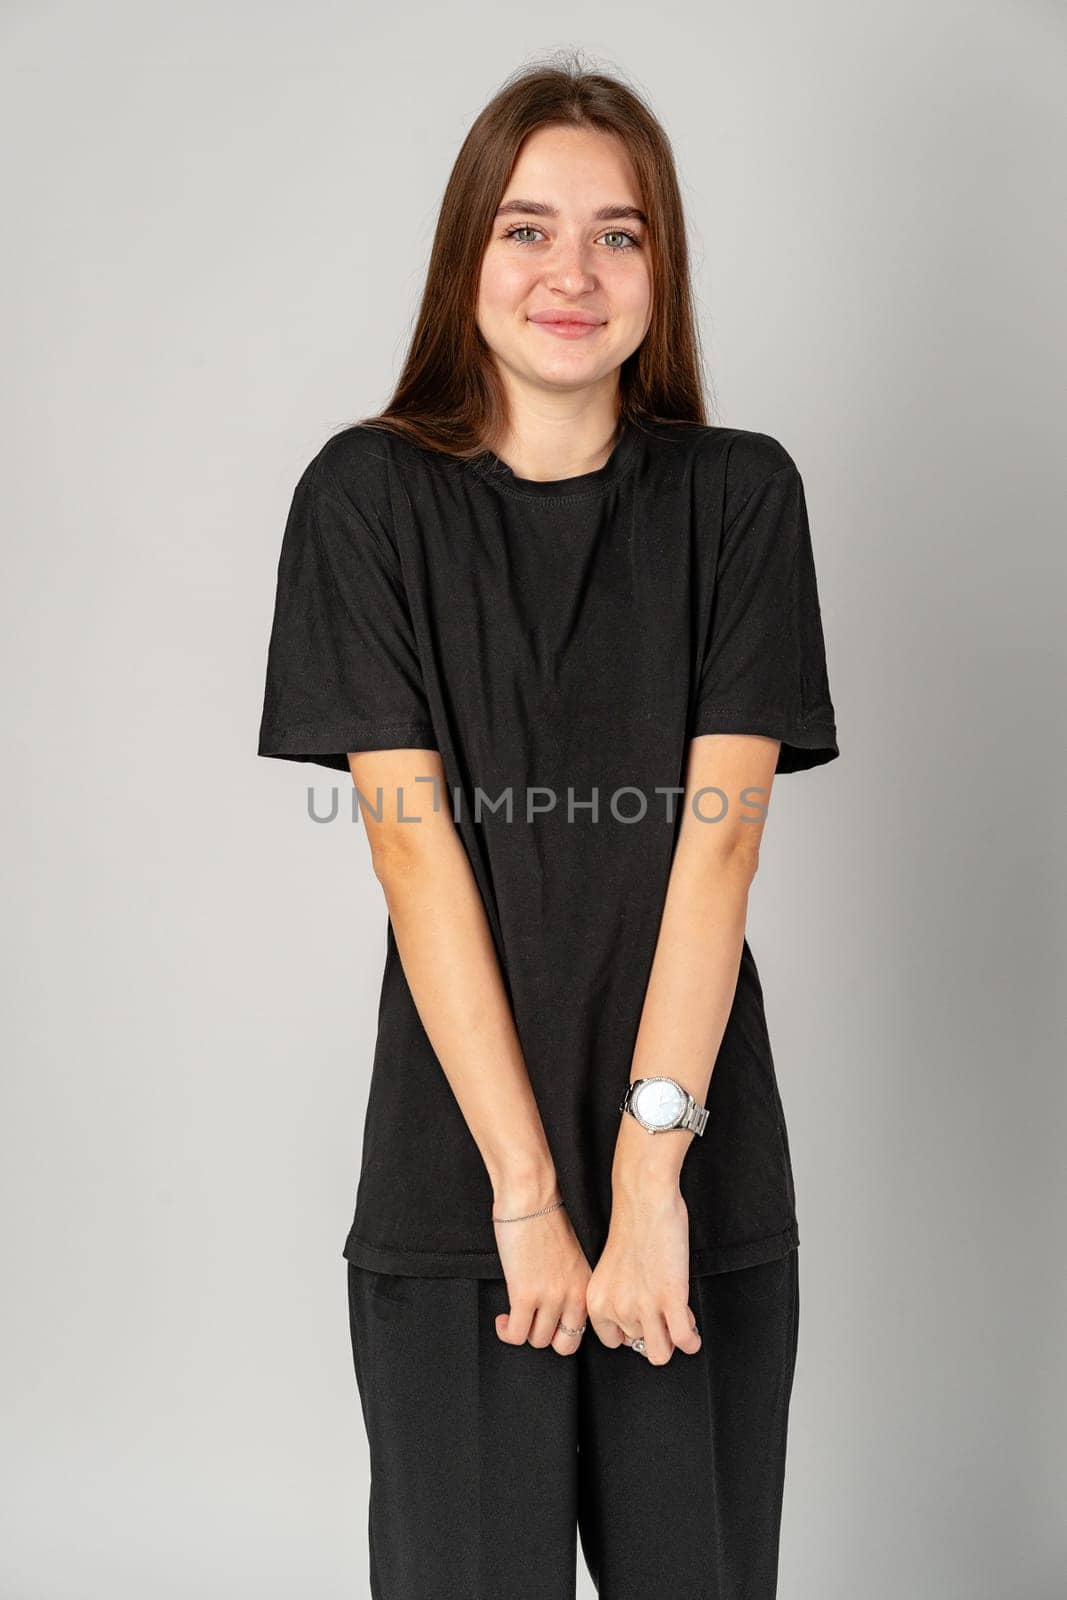 Young Woman in Black Shirt and Black Pants in Studio close up